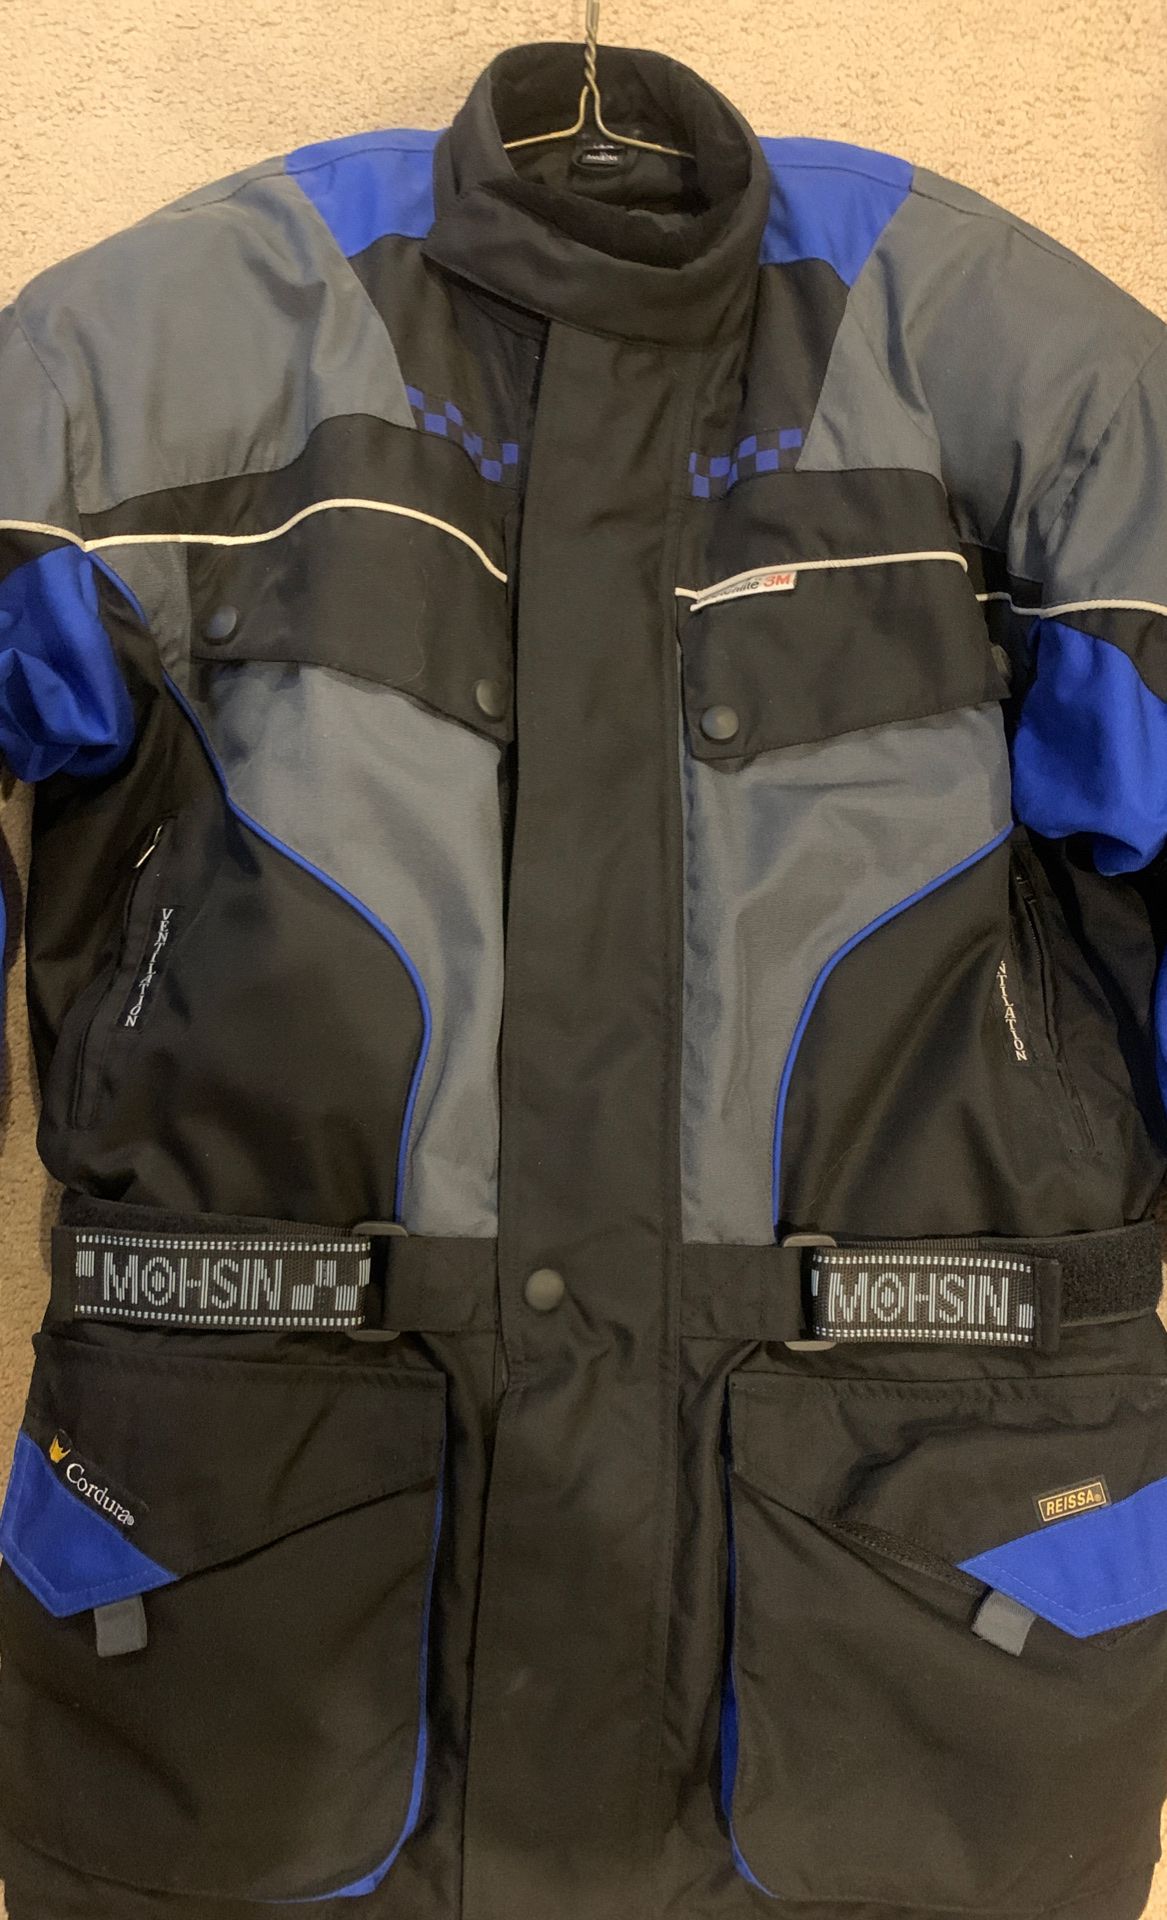 Motorcycle Jacket XL. Scotch lite 3M, Codura, armored with ventilation. Black and blue Perfect condition.